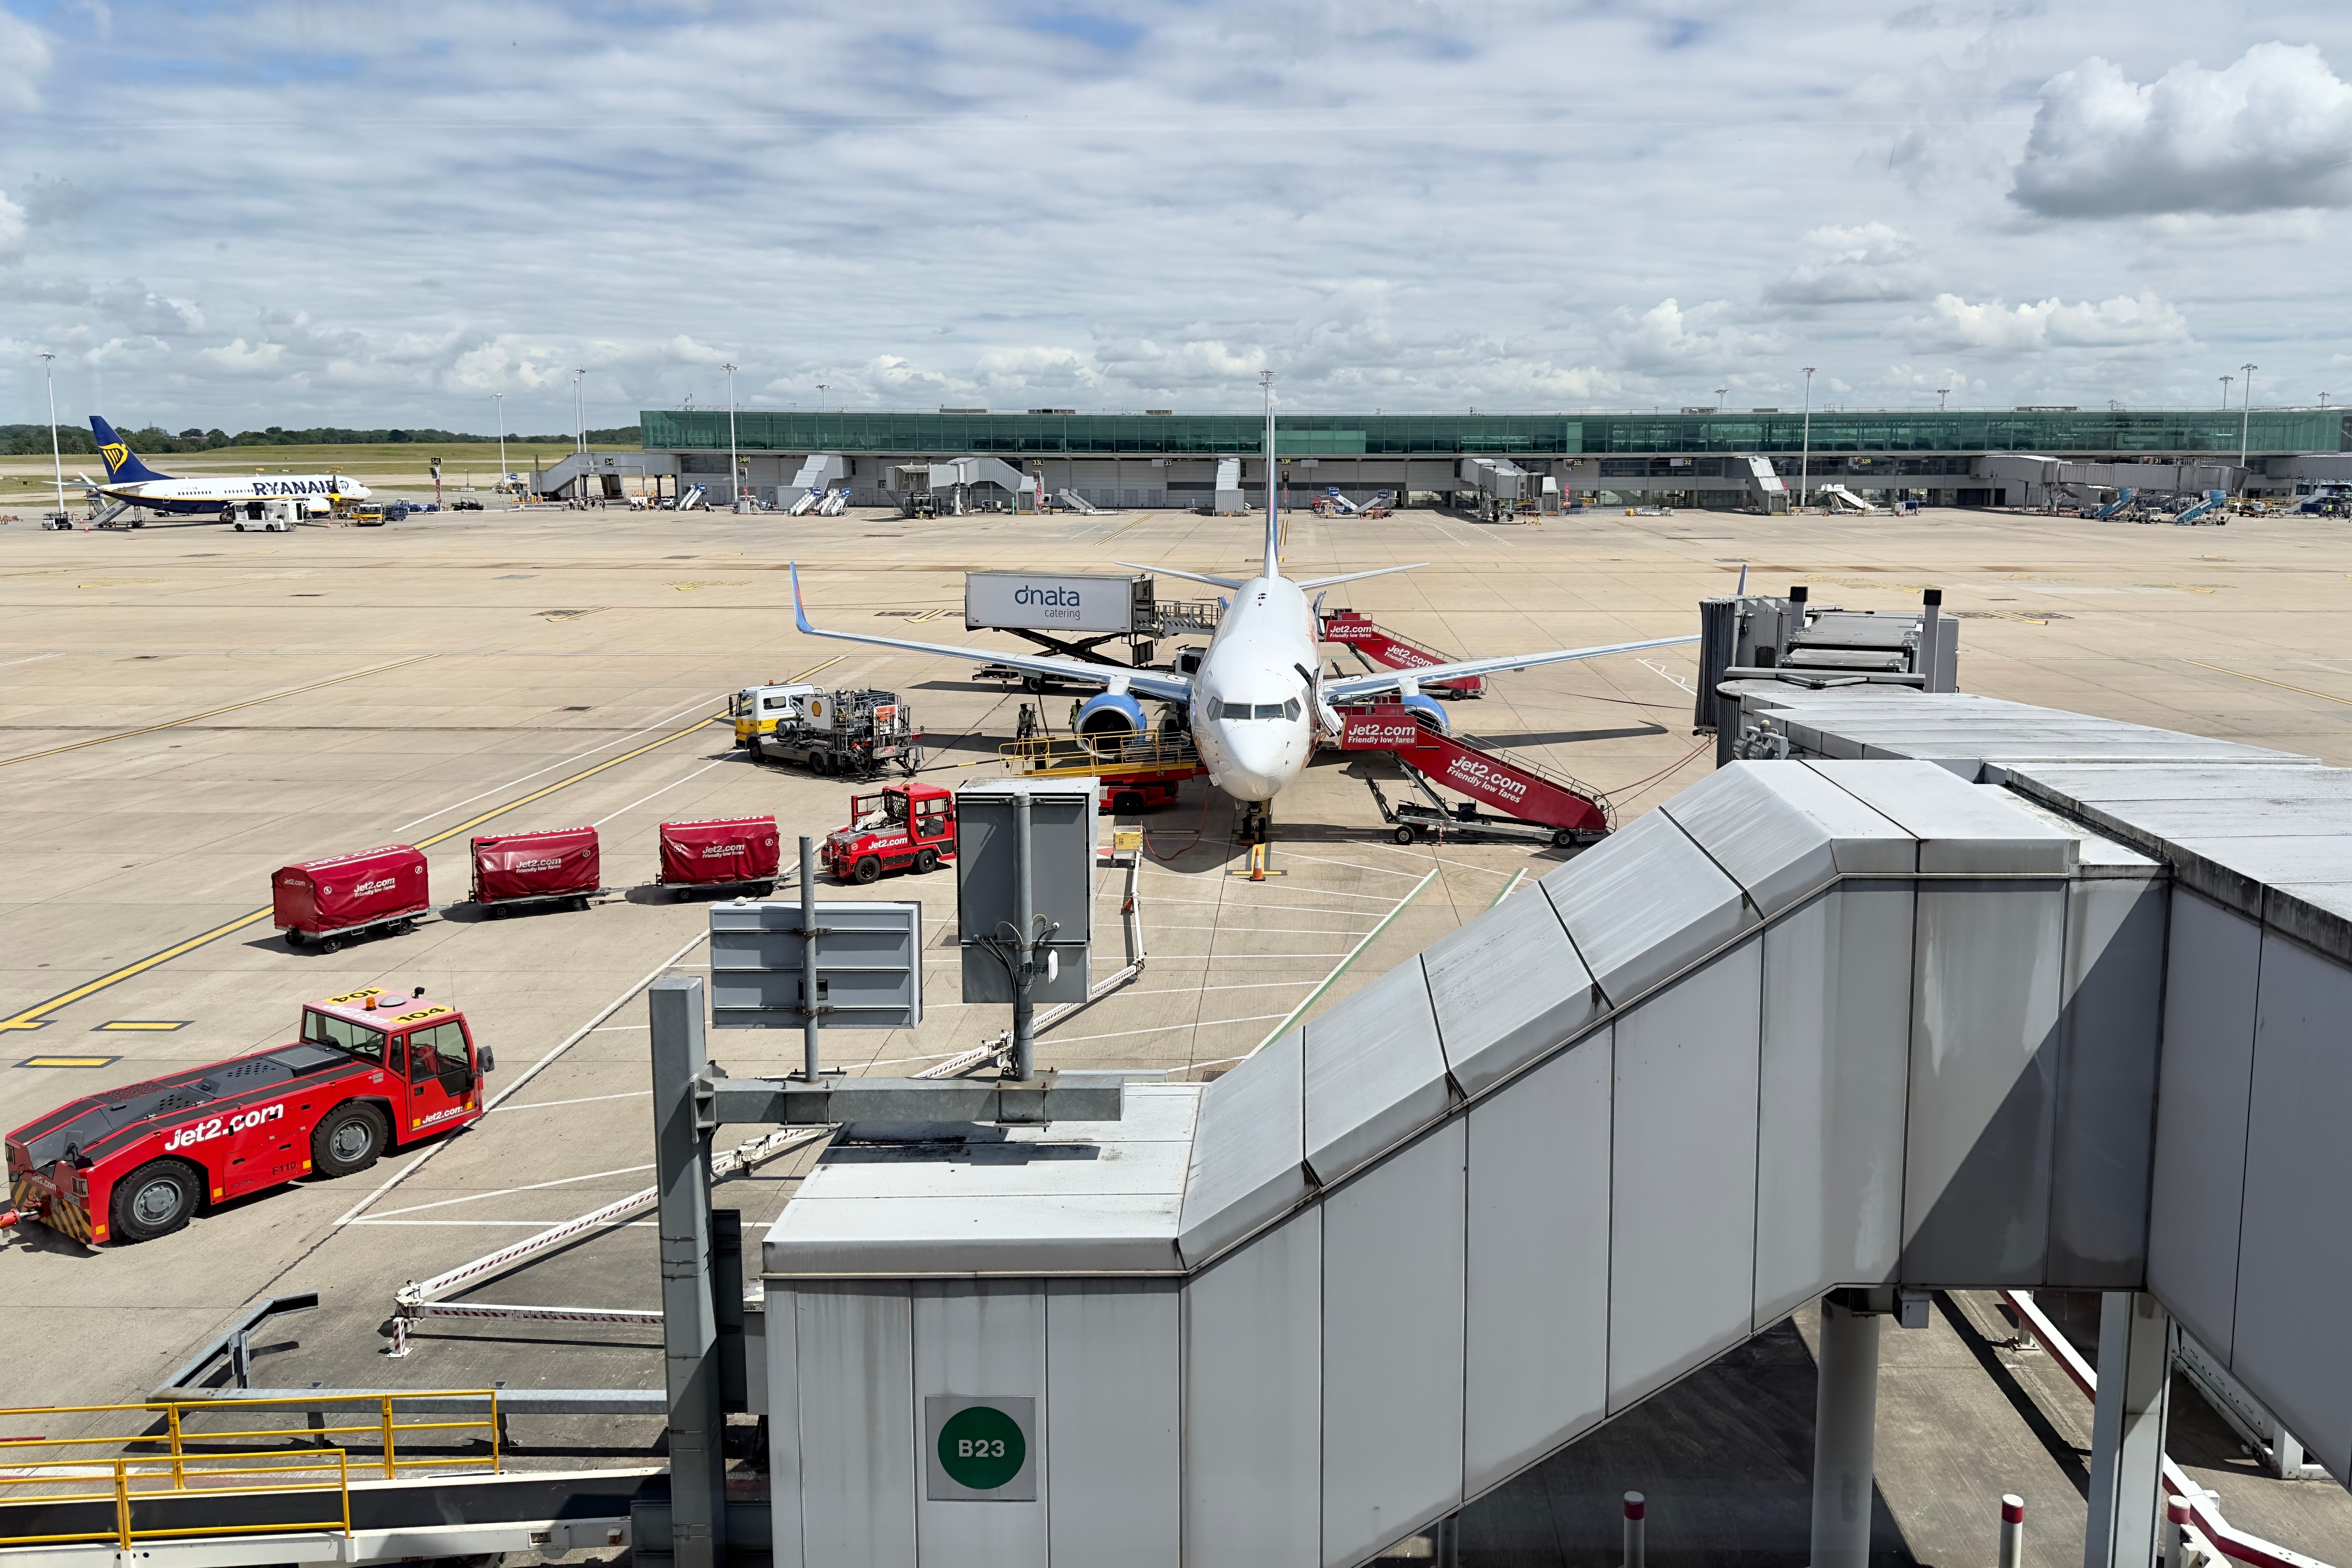 London Stansted Airport Tarmac Overview